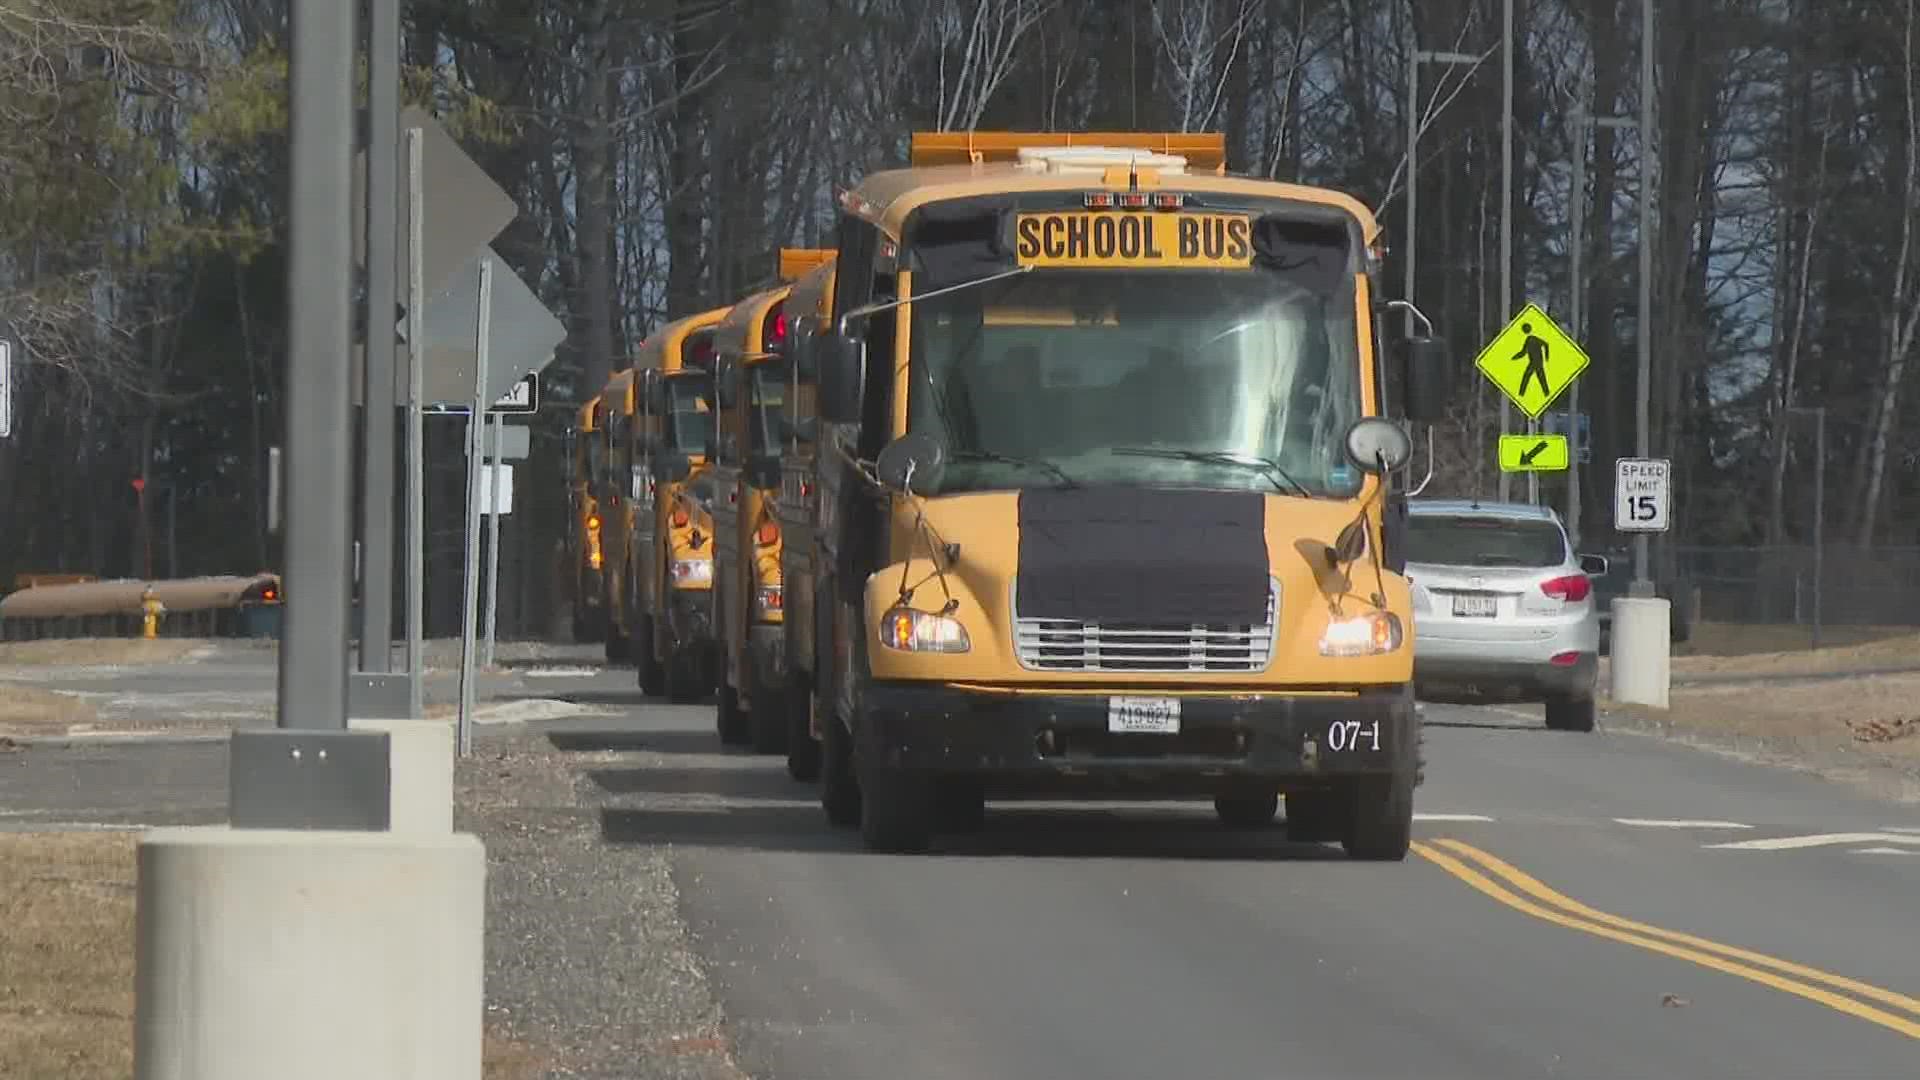 MSAD 75 bus driver Arthur McDougall died of a heart attack while driving kids to school in Topsham last week.